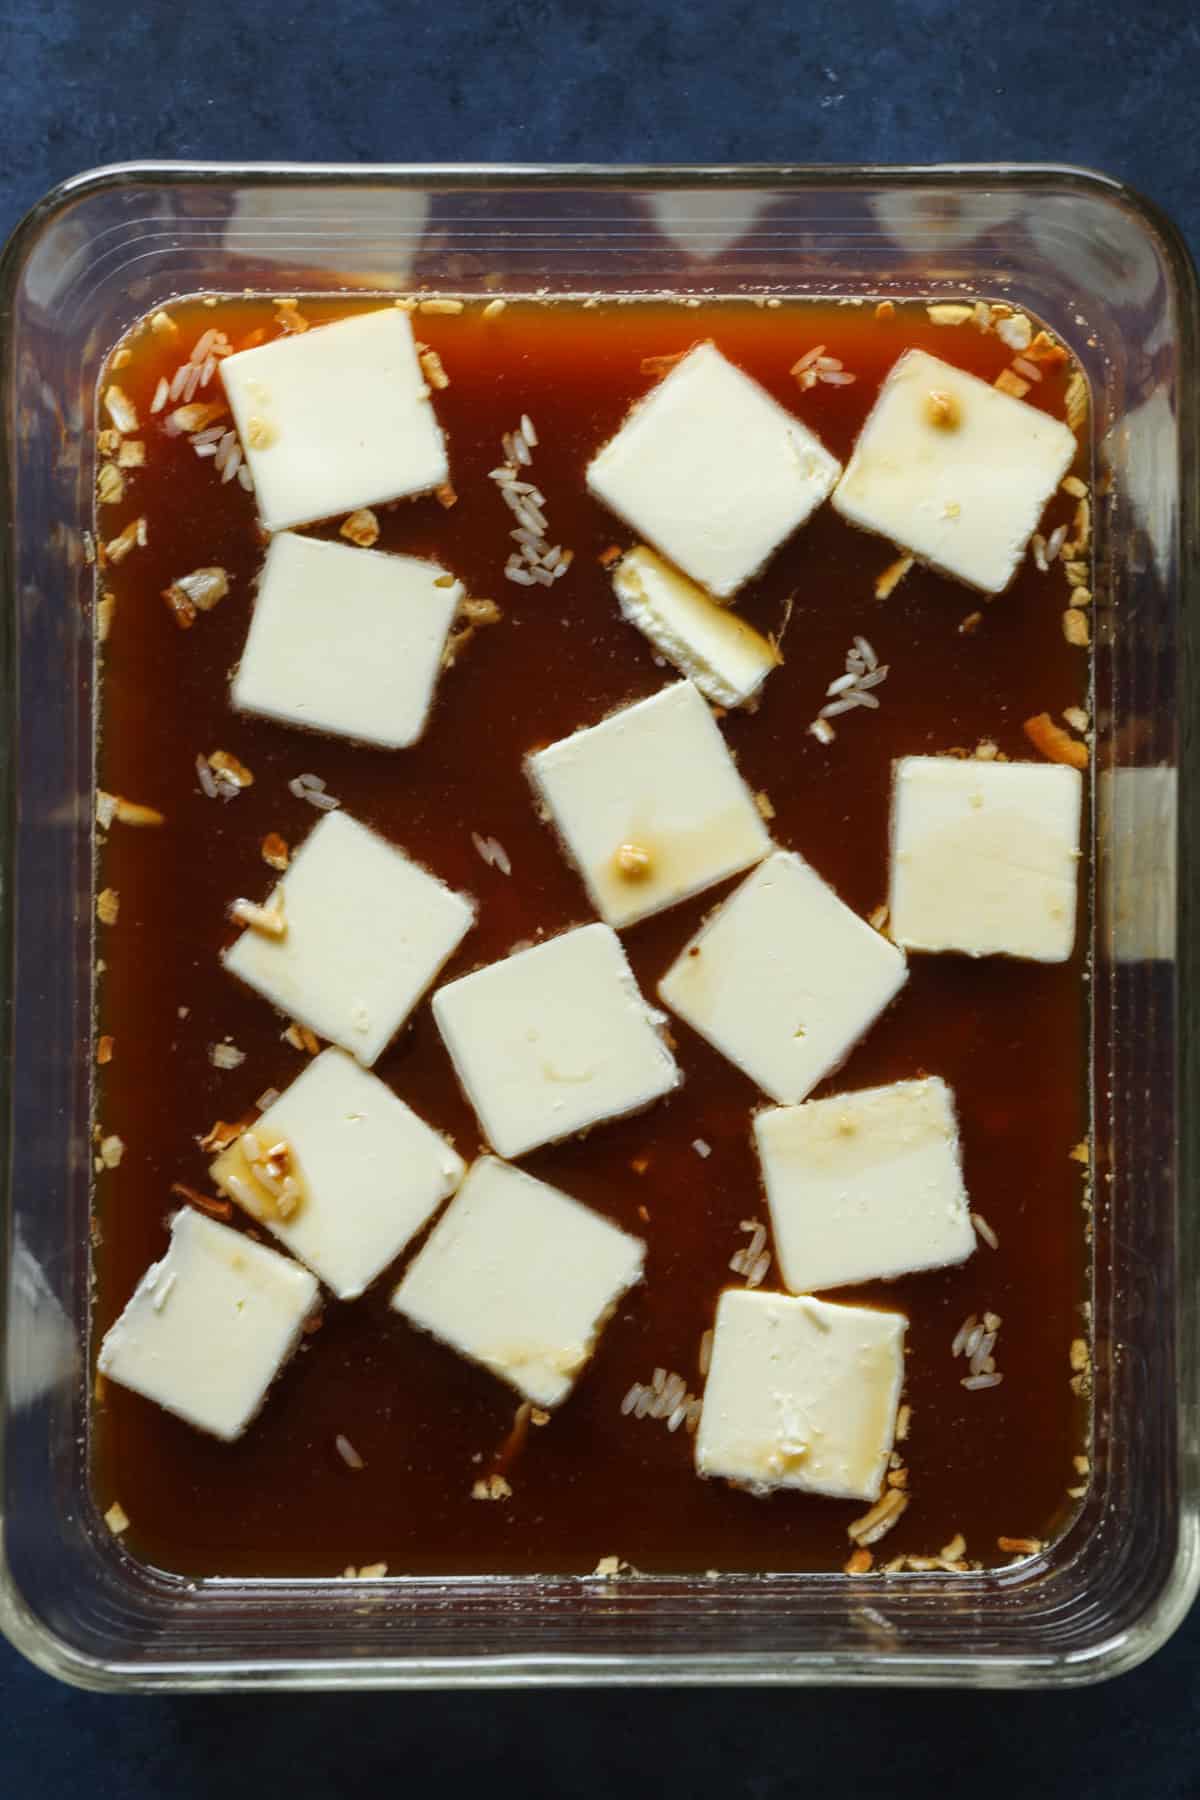 Uncooked rice, beef broth, and onion soup mix in a glass dish topped with slices of butter to be baked.